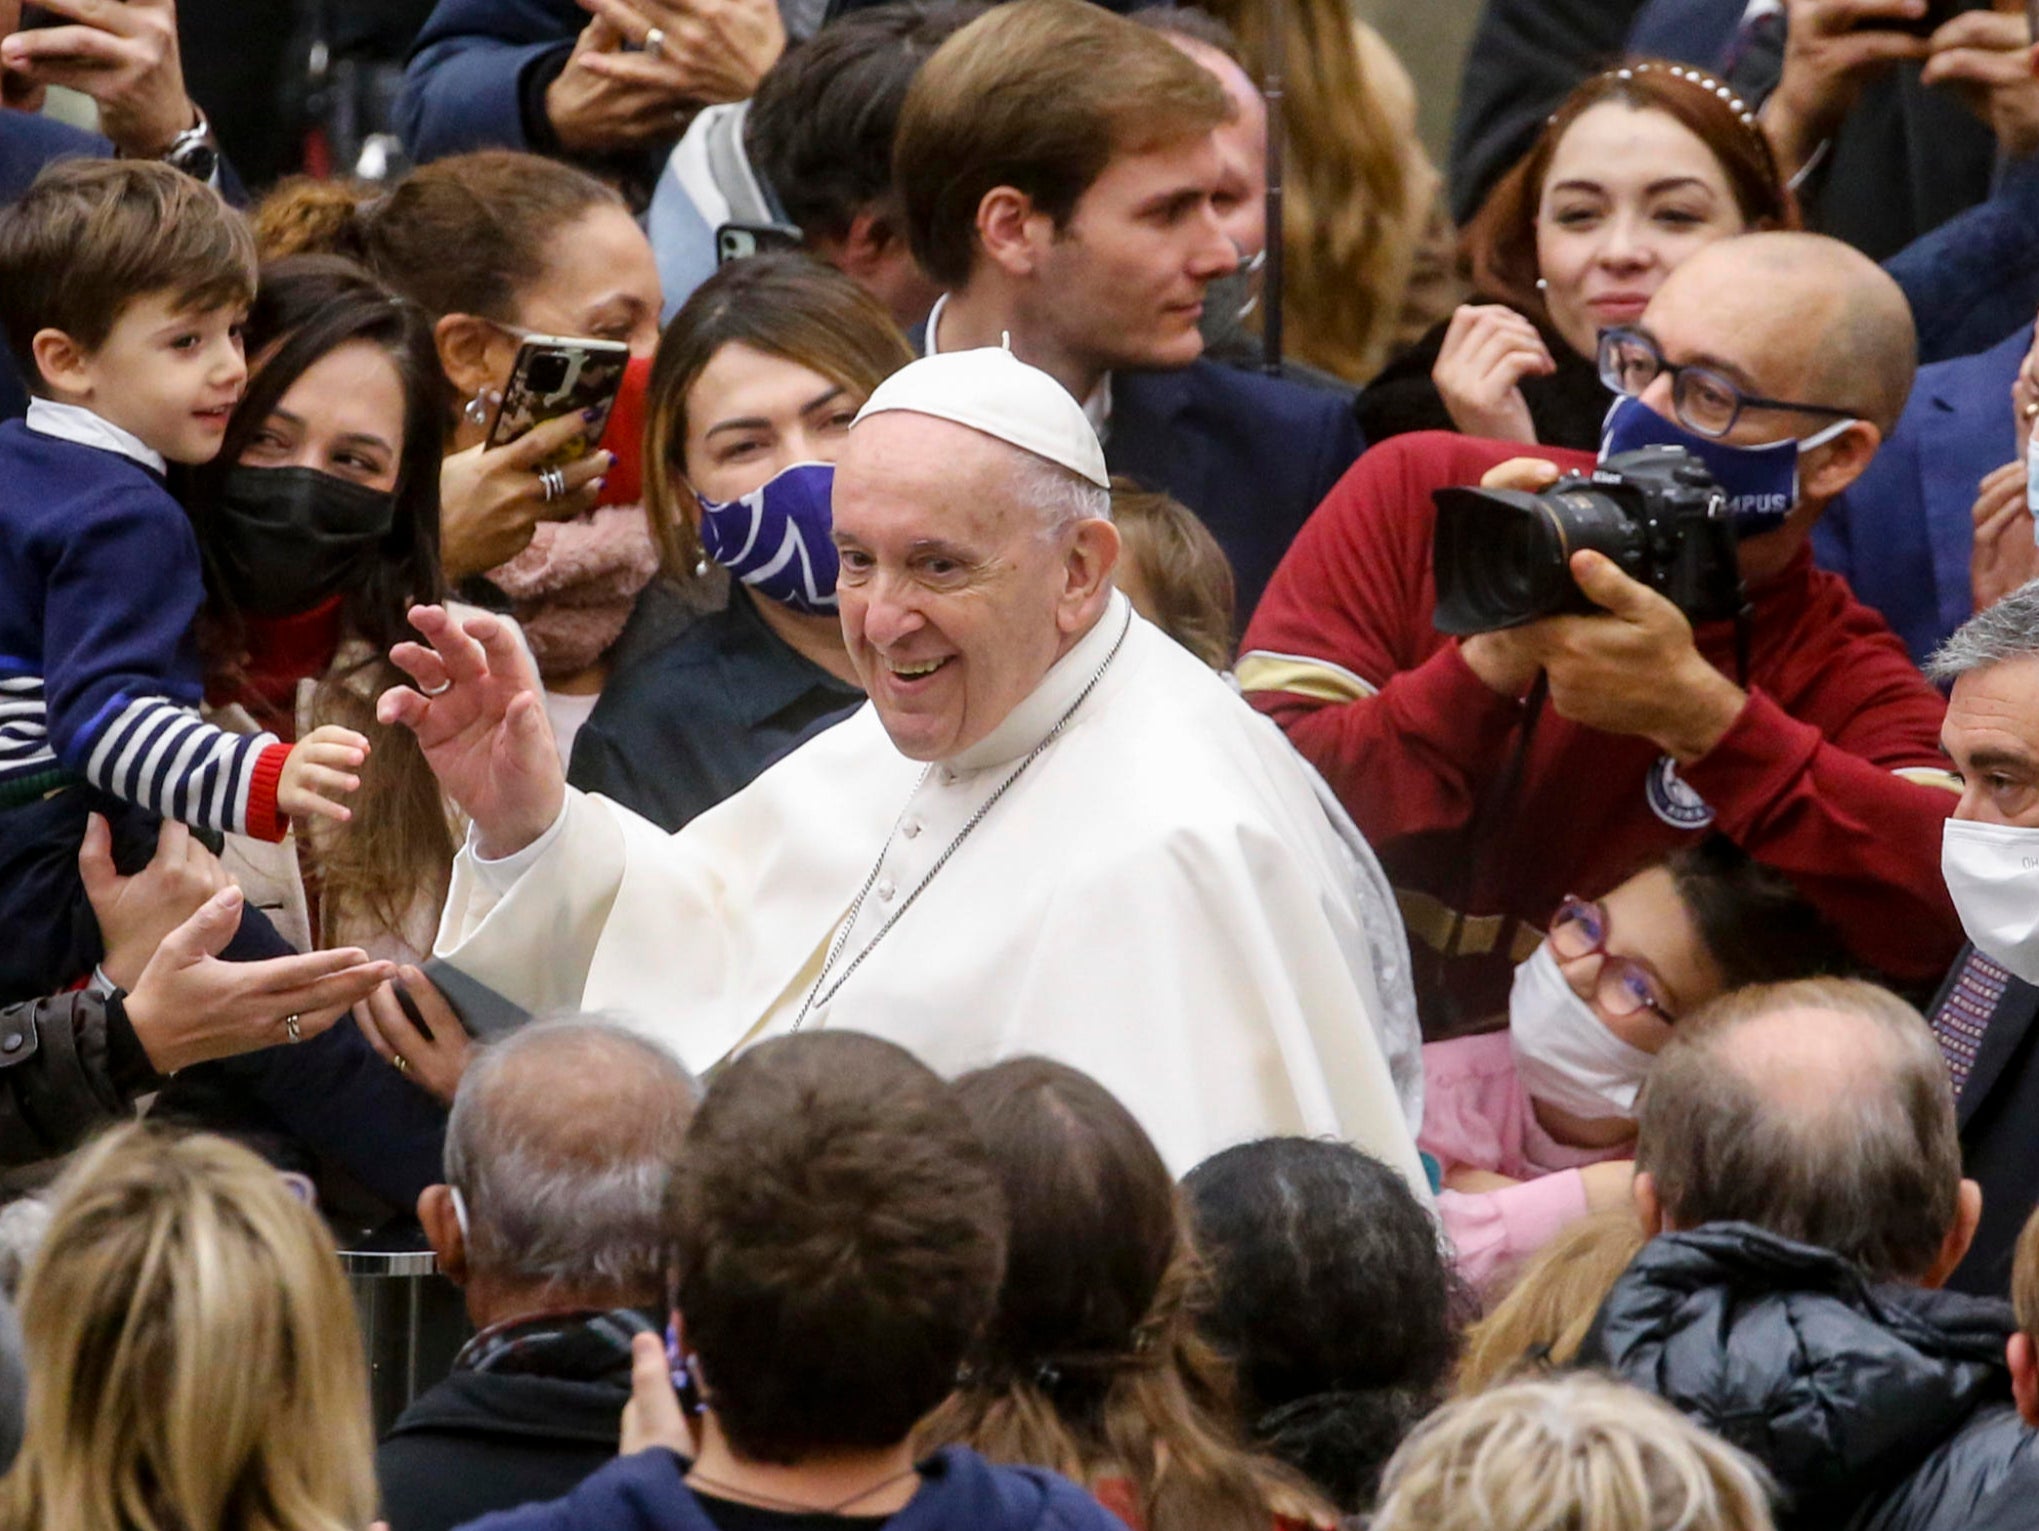 Pope Francis greets the faithful during his weekly general audience in Vatican City